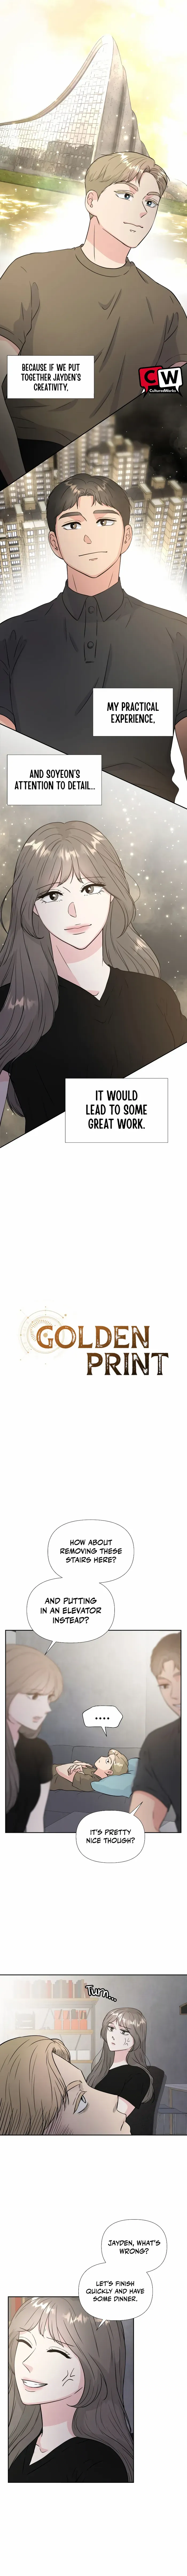 Golden Print - Page 3